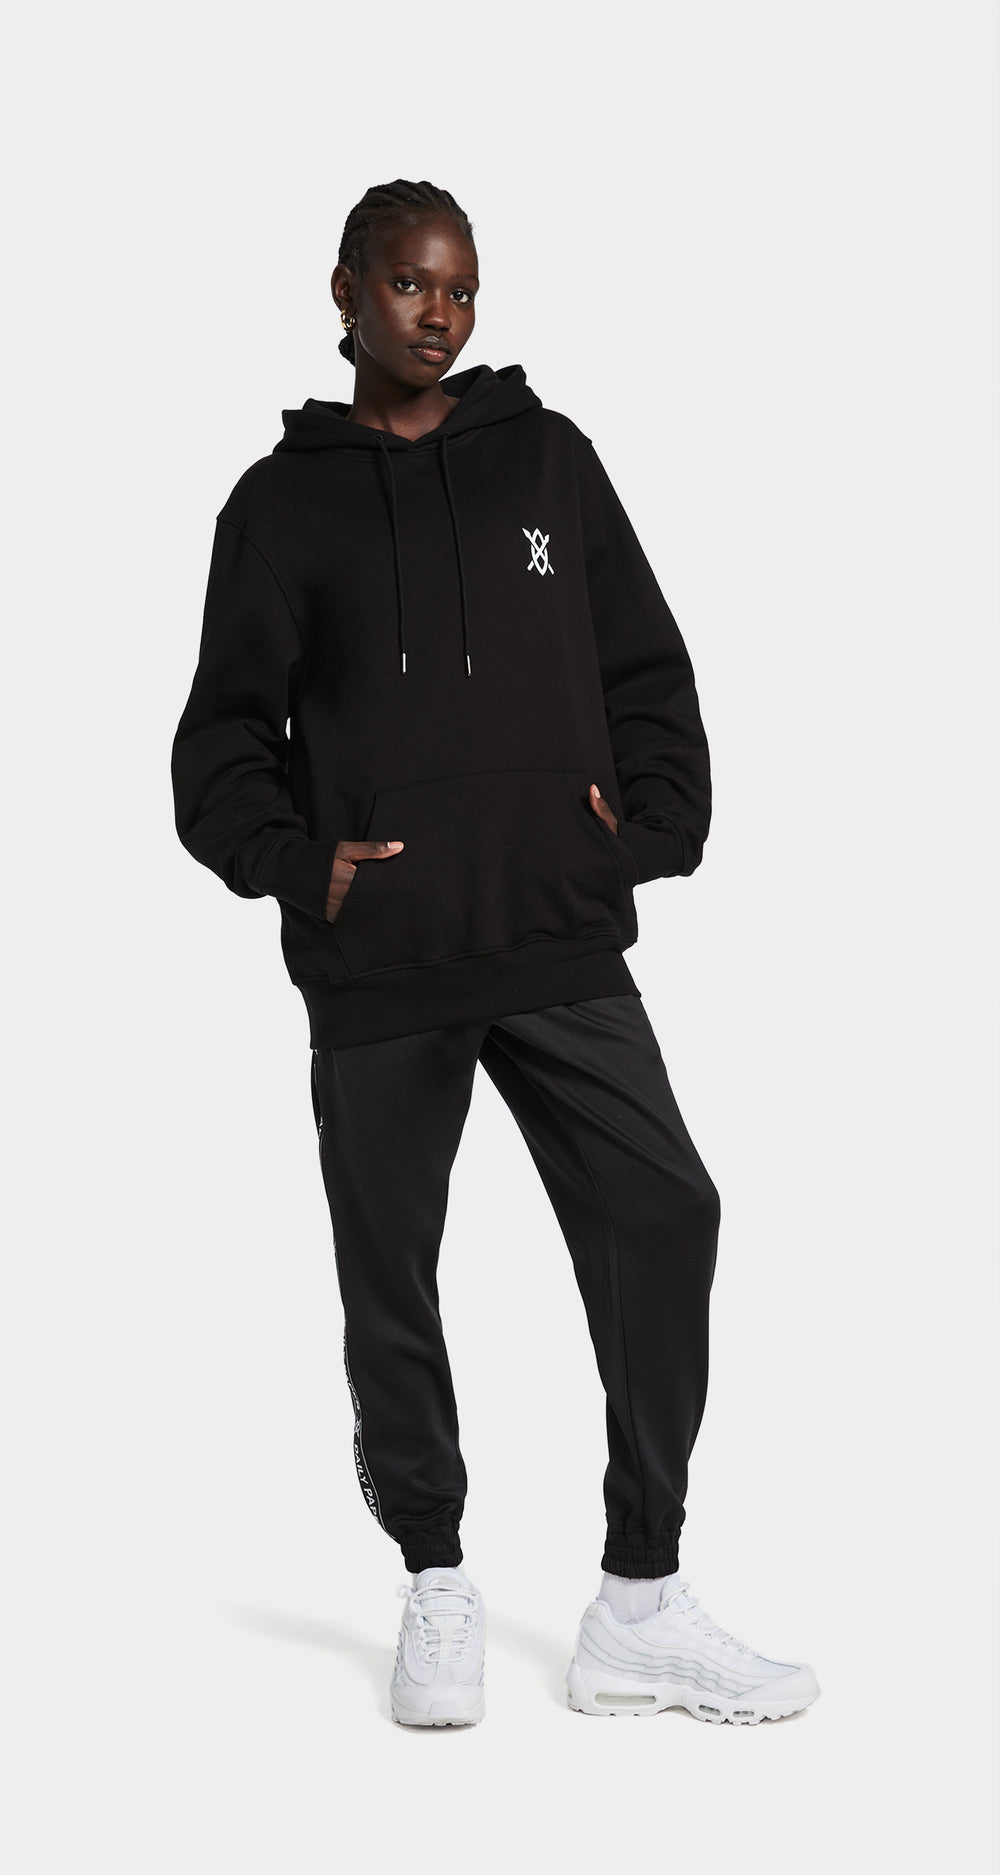 DP - Black White Amsterdam Flagship Store Hoody- Wmn - Front